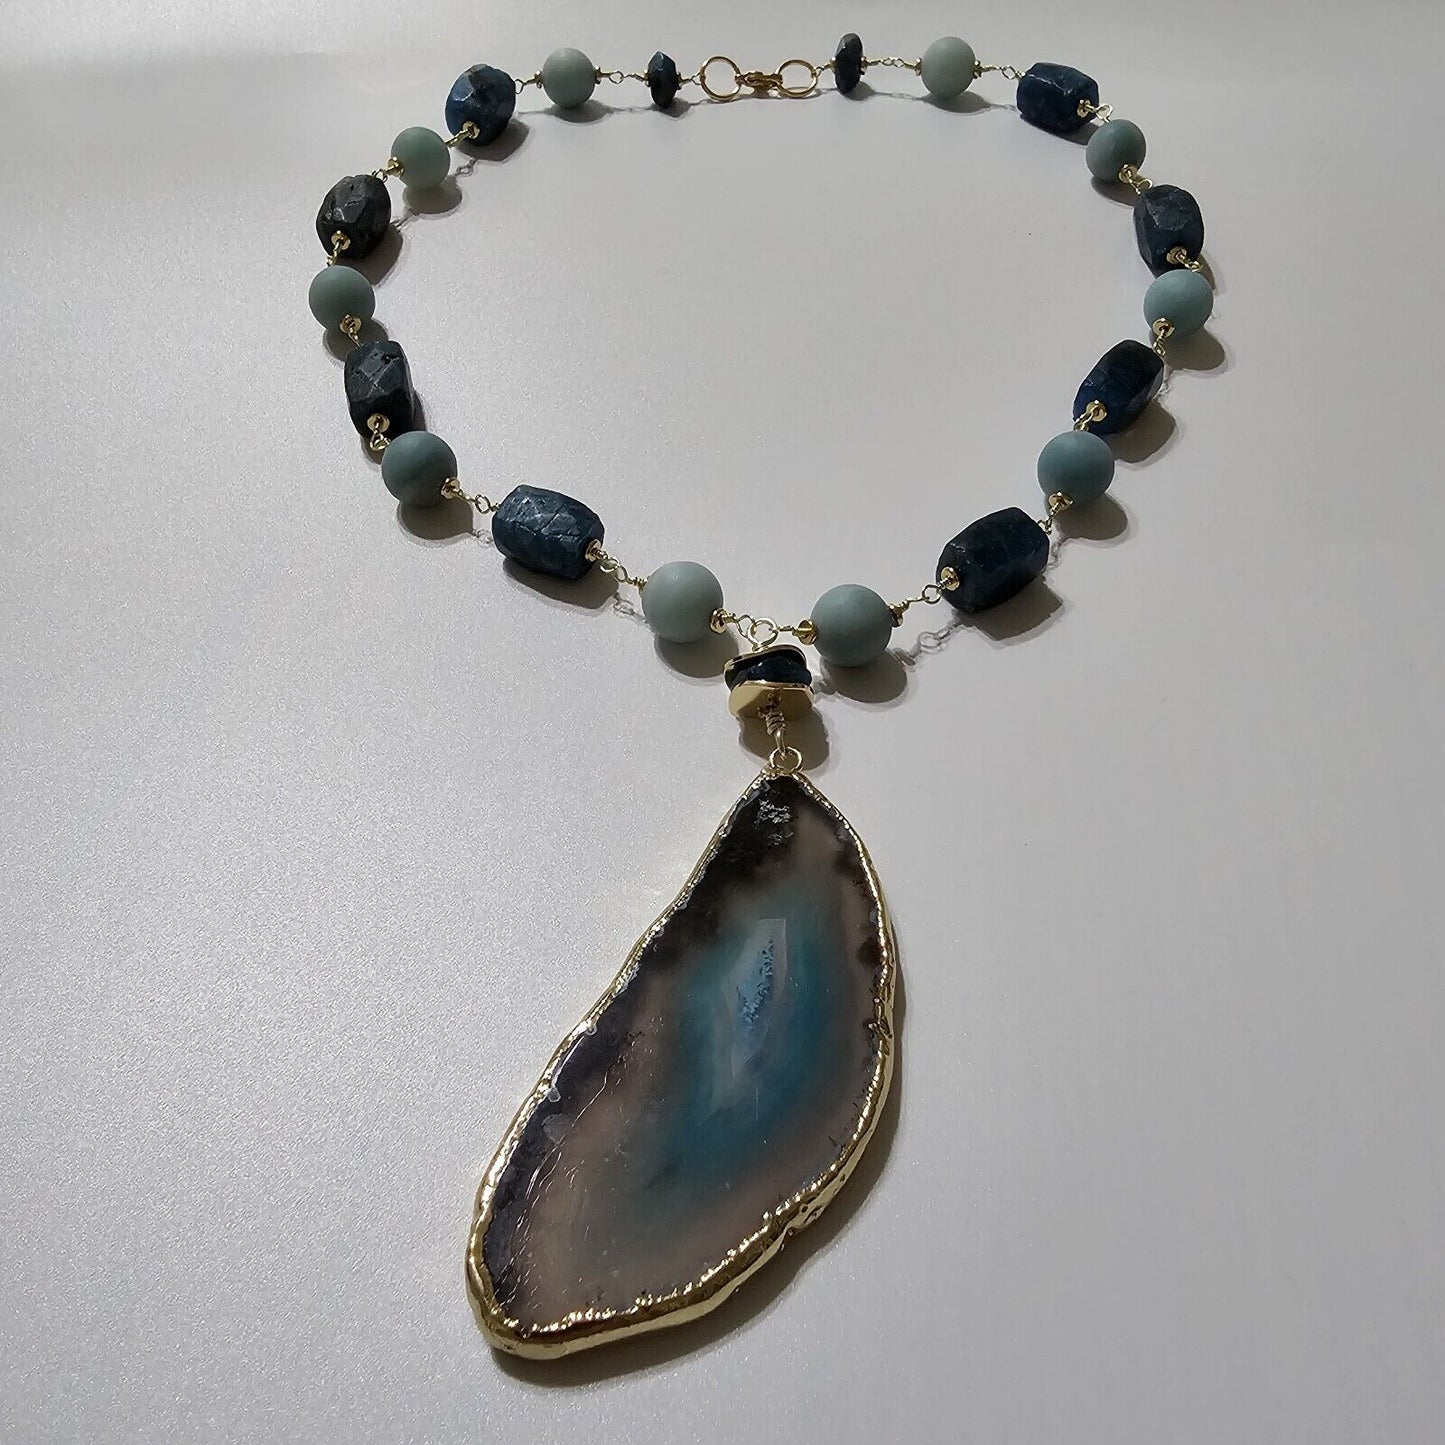 Teal Blue Agate, Amazonite & Apatite, 18K Gold Plt 4in1 Statement Necklace